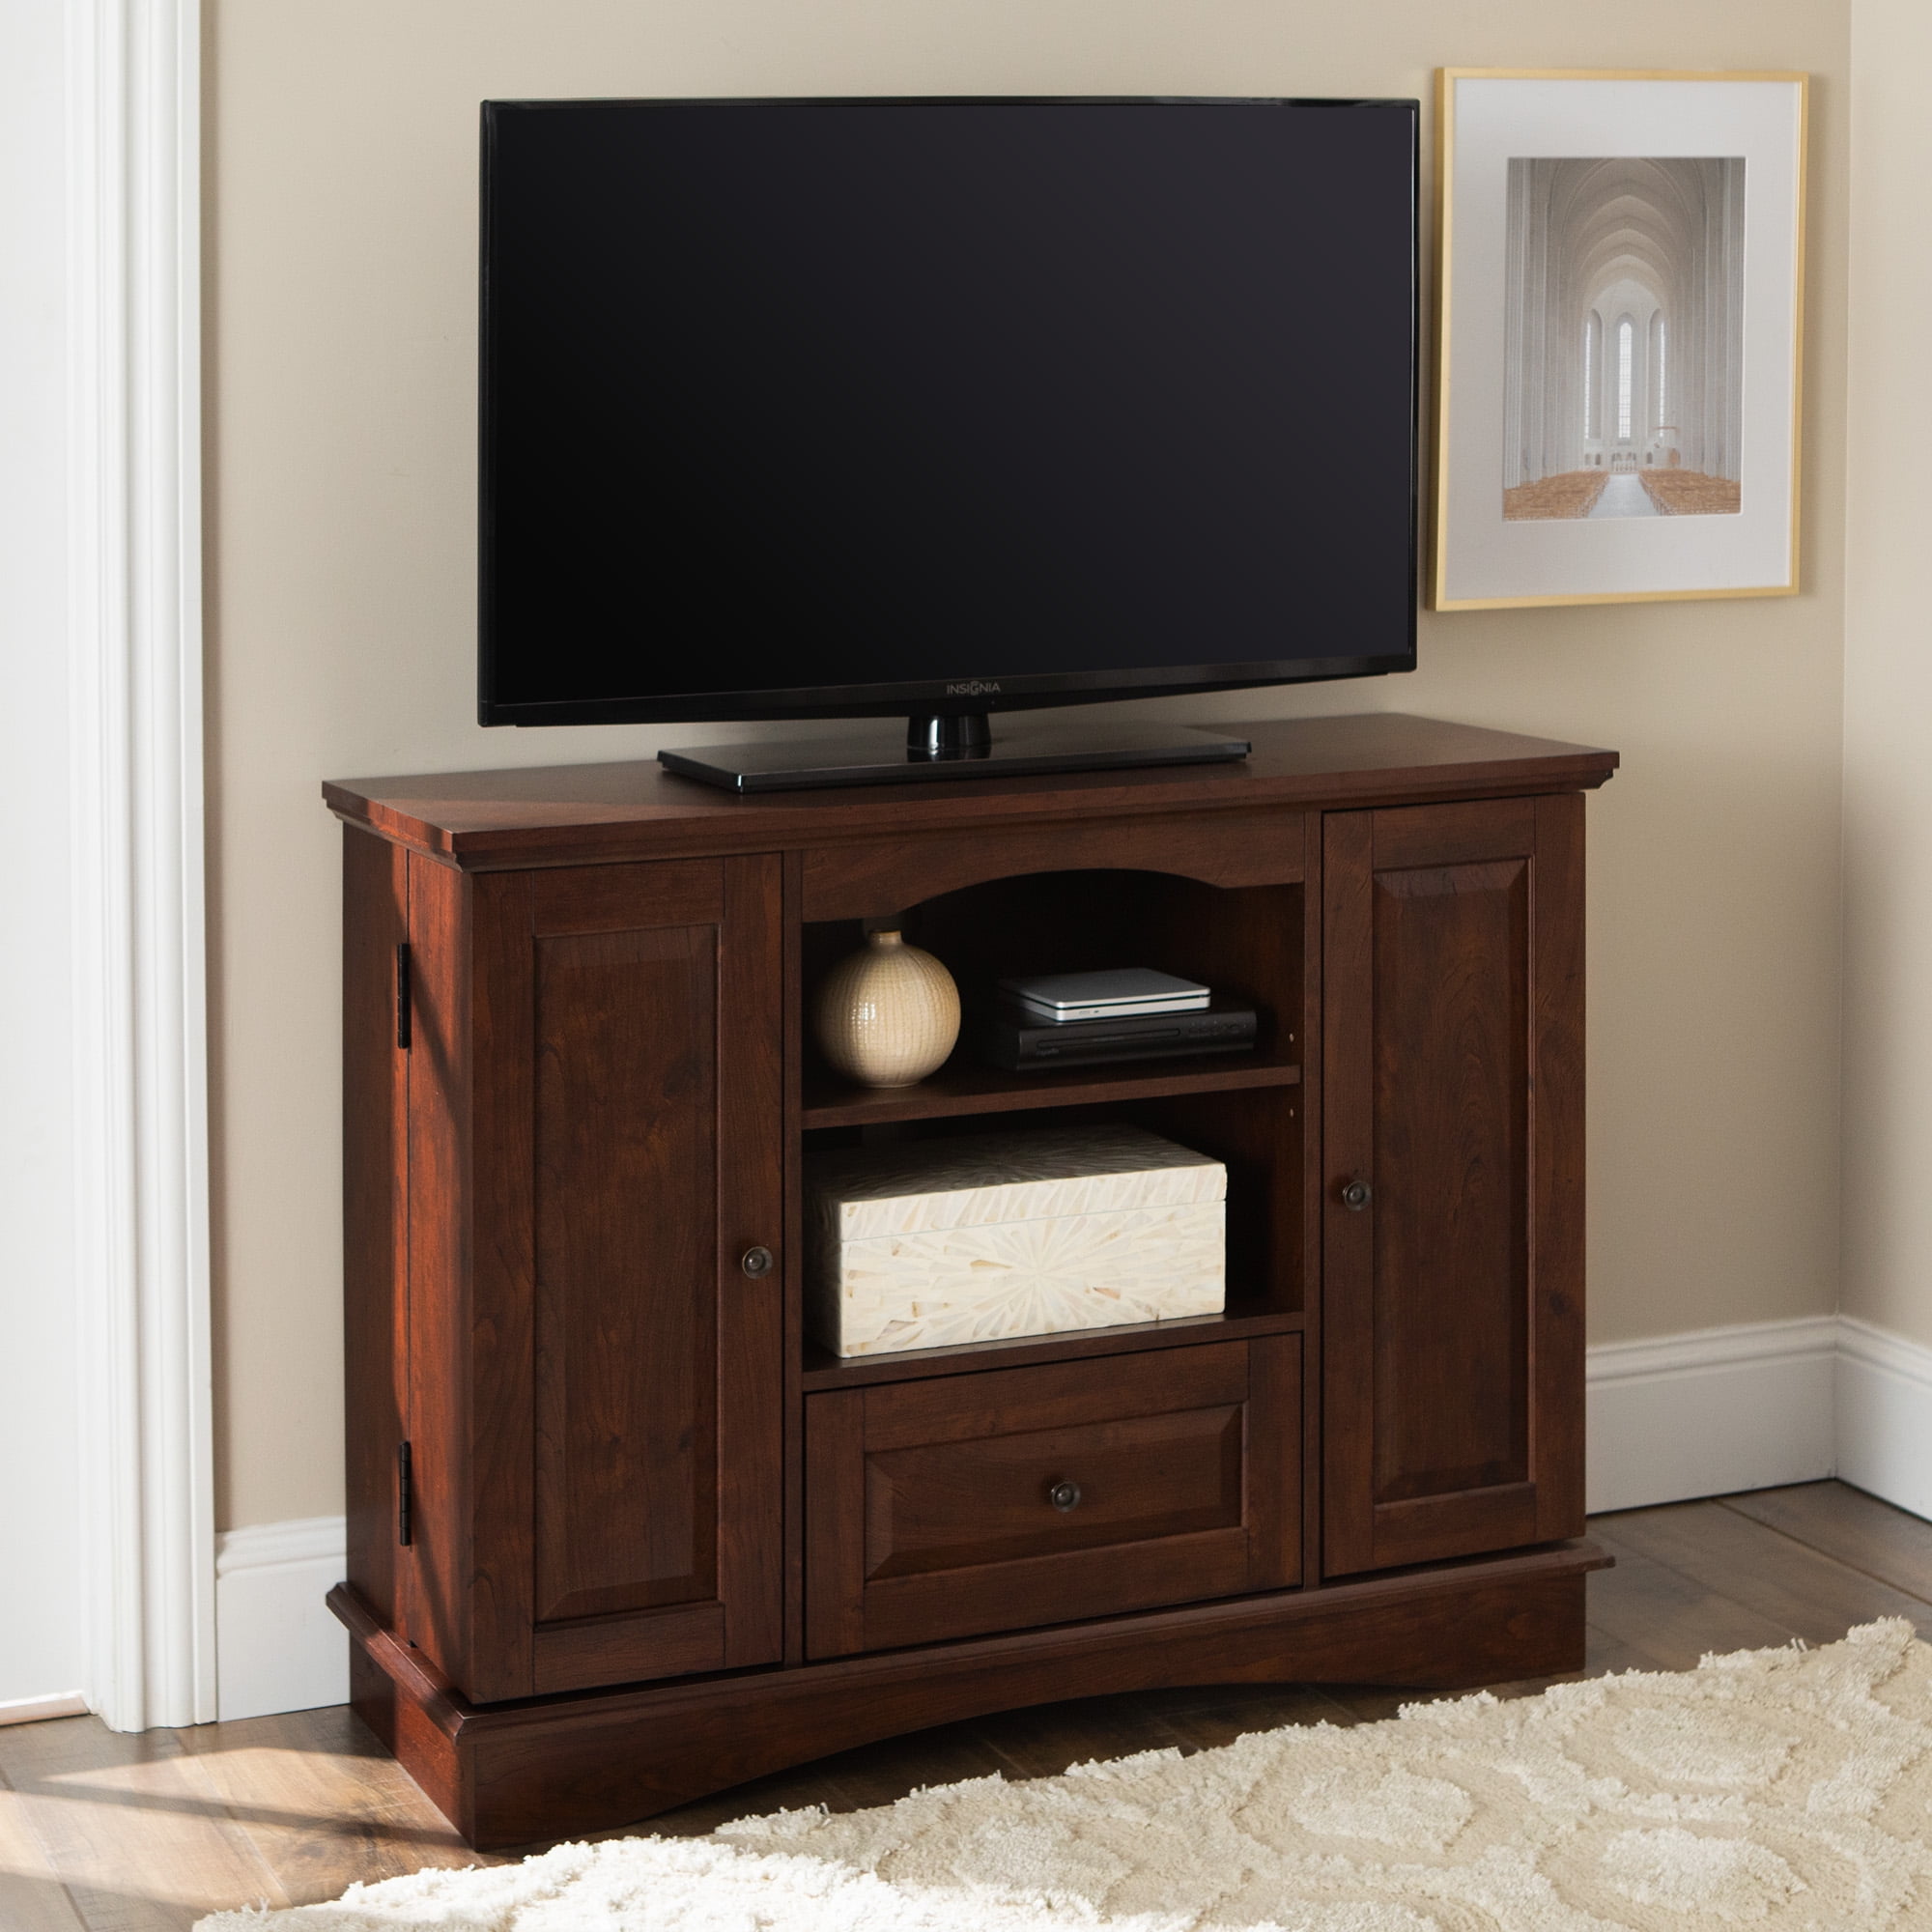 Walker Edison Traditional Tall TV Stand for TVs up to 48 